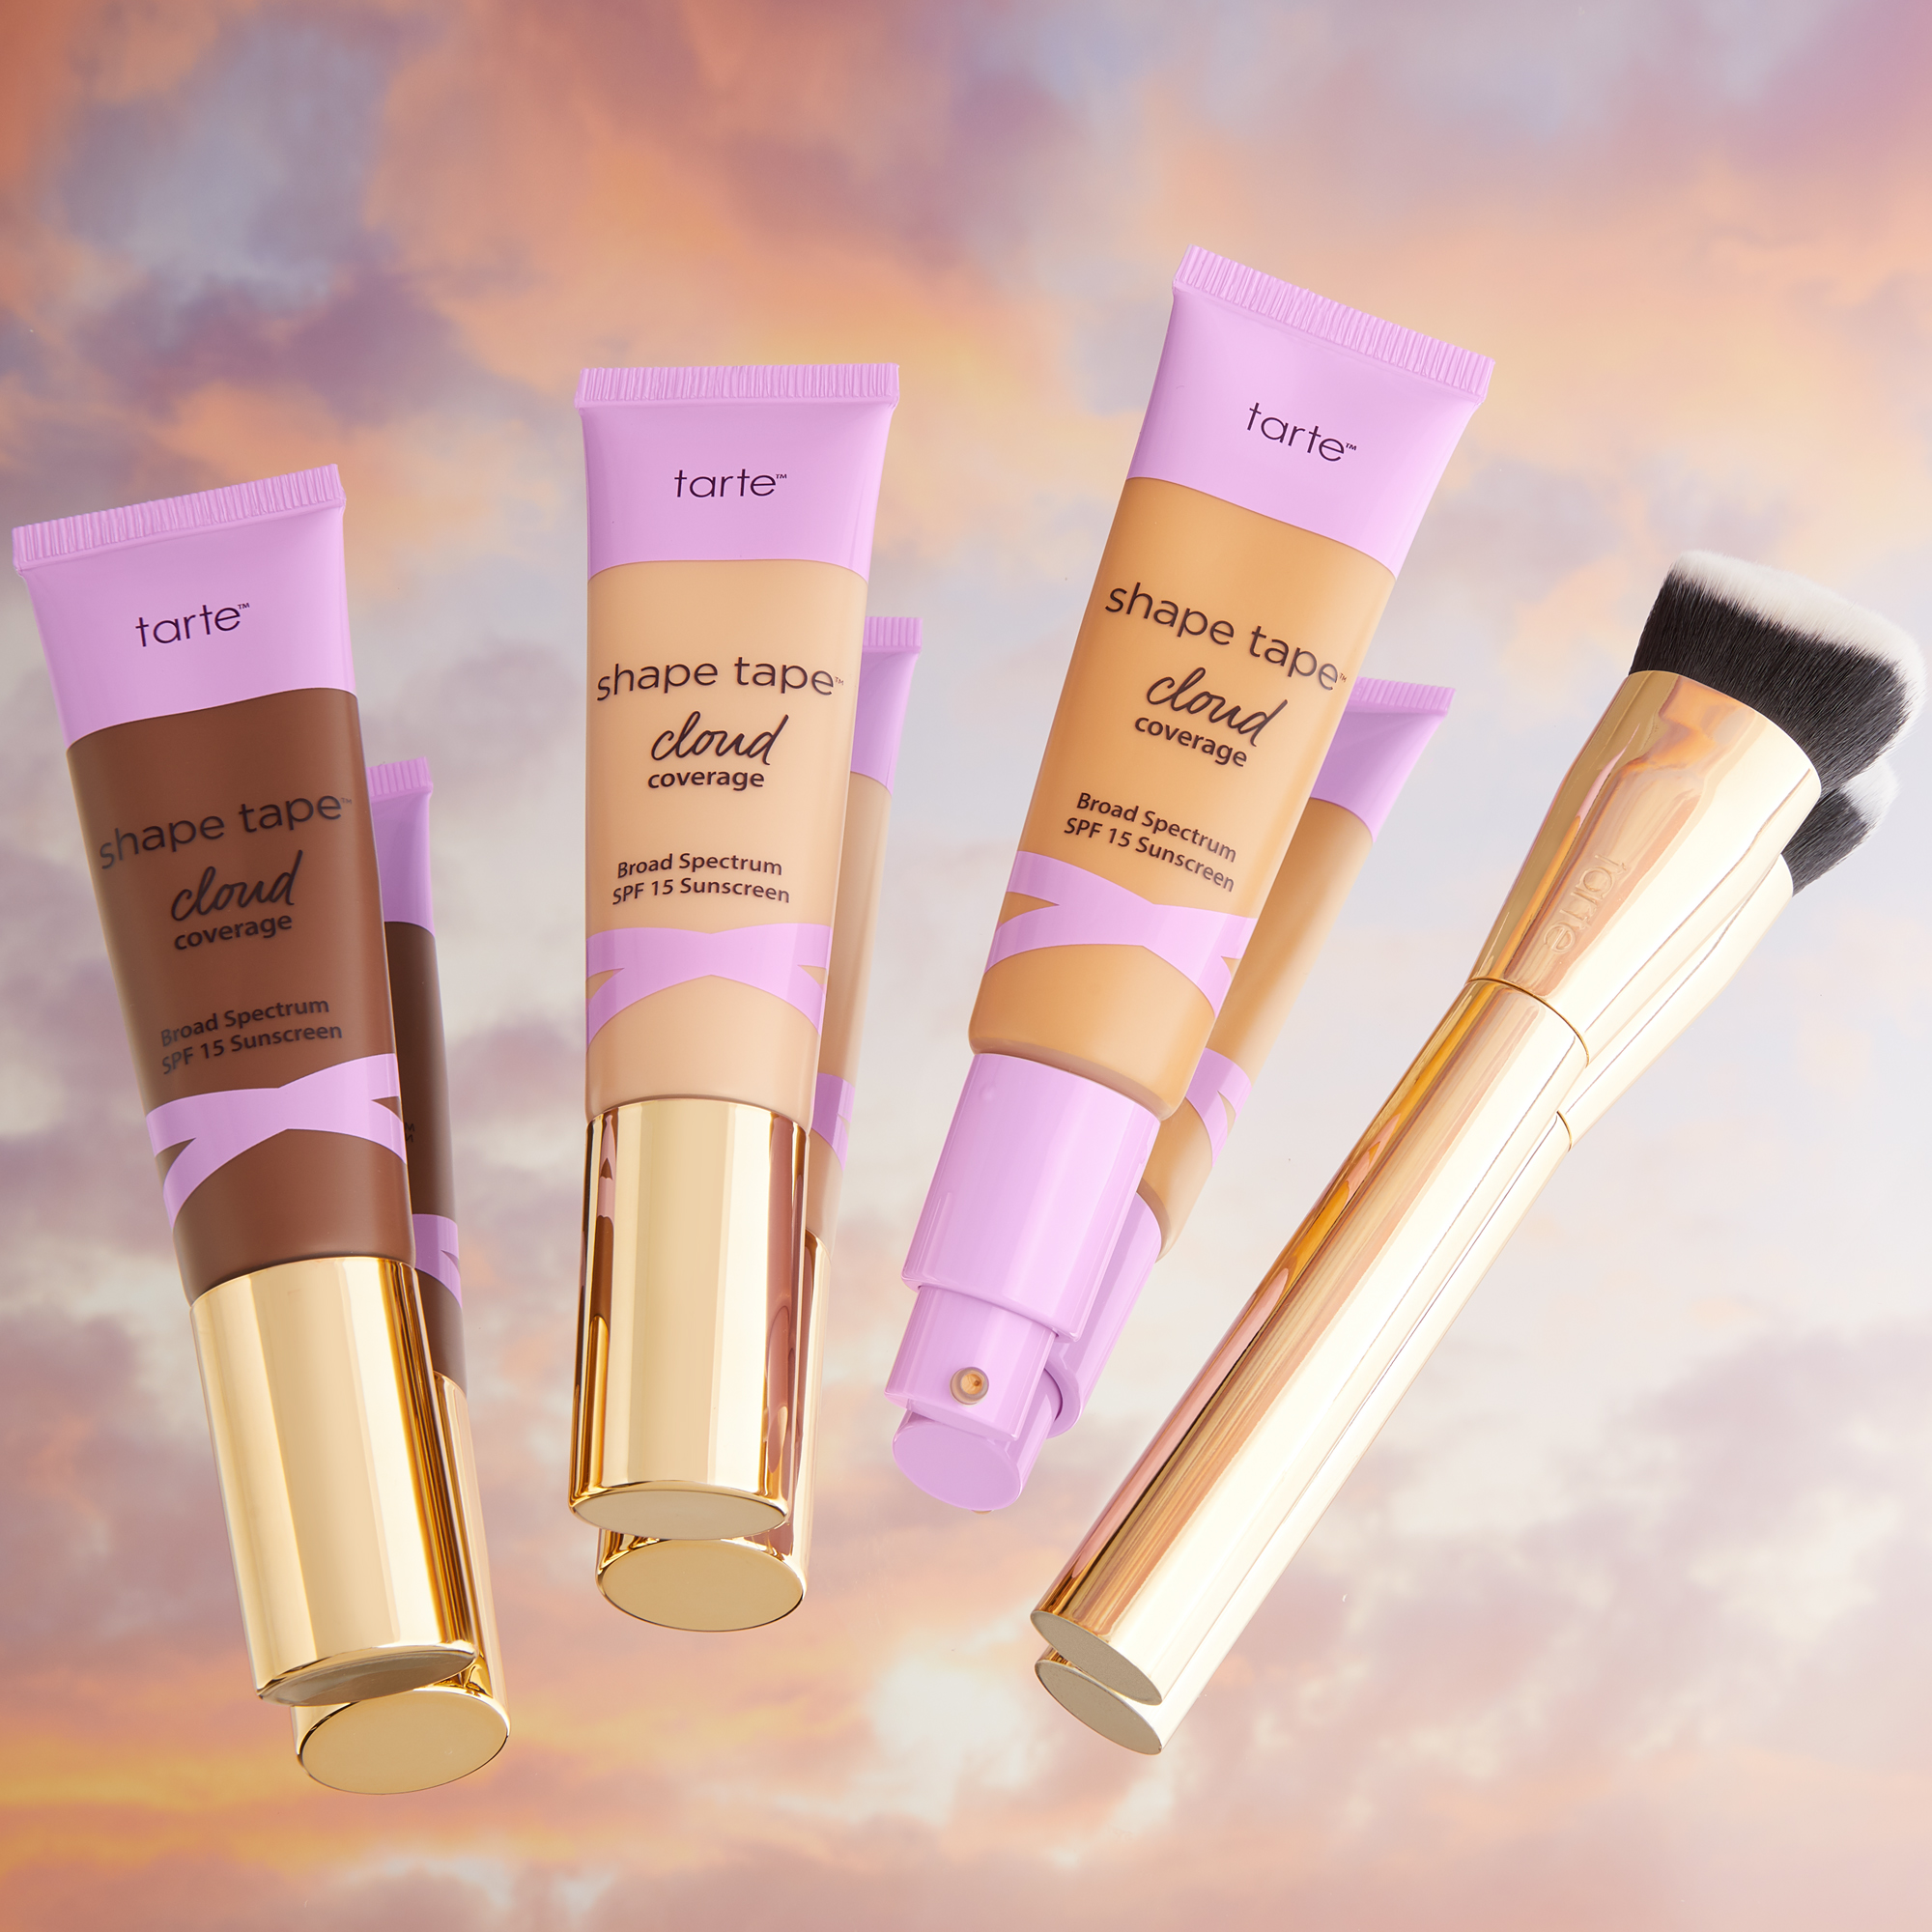 tartecosmetics on X: Want to feel like you are on cloud 9? Try